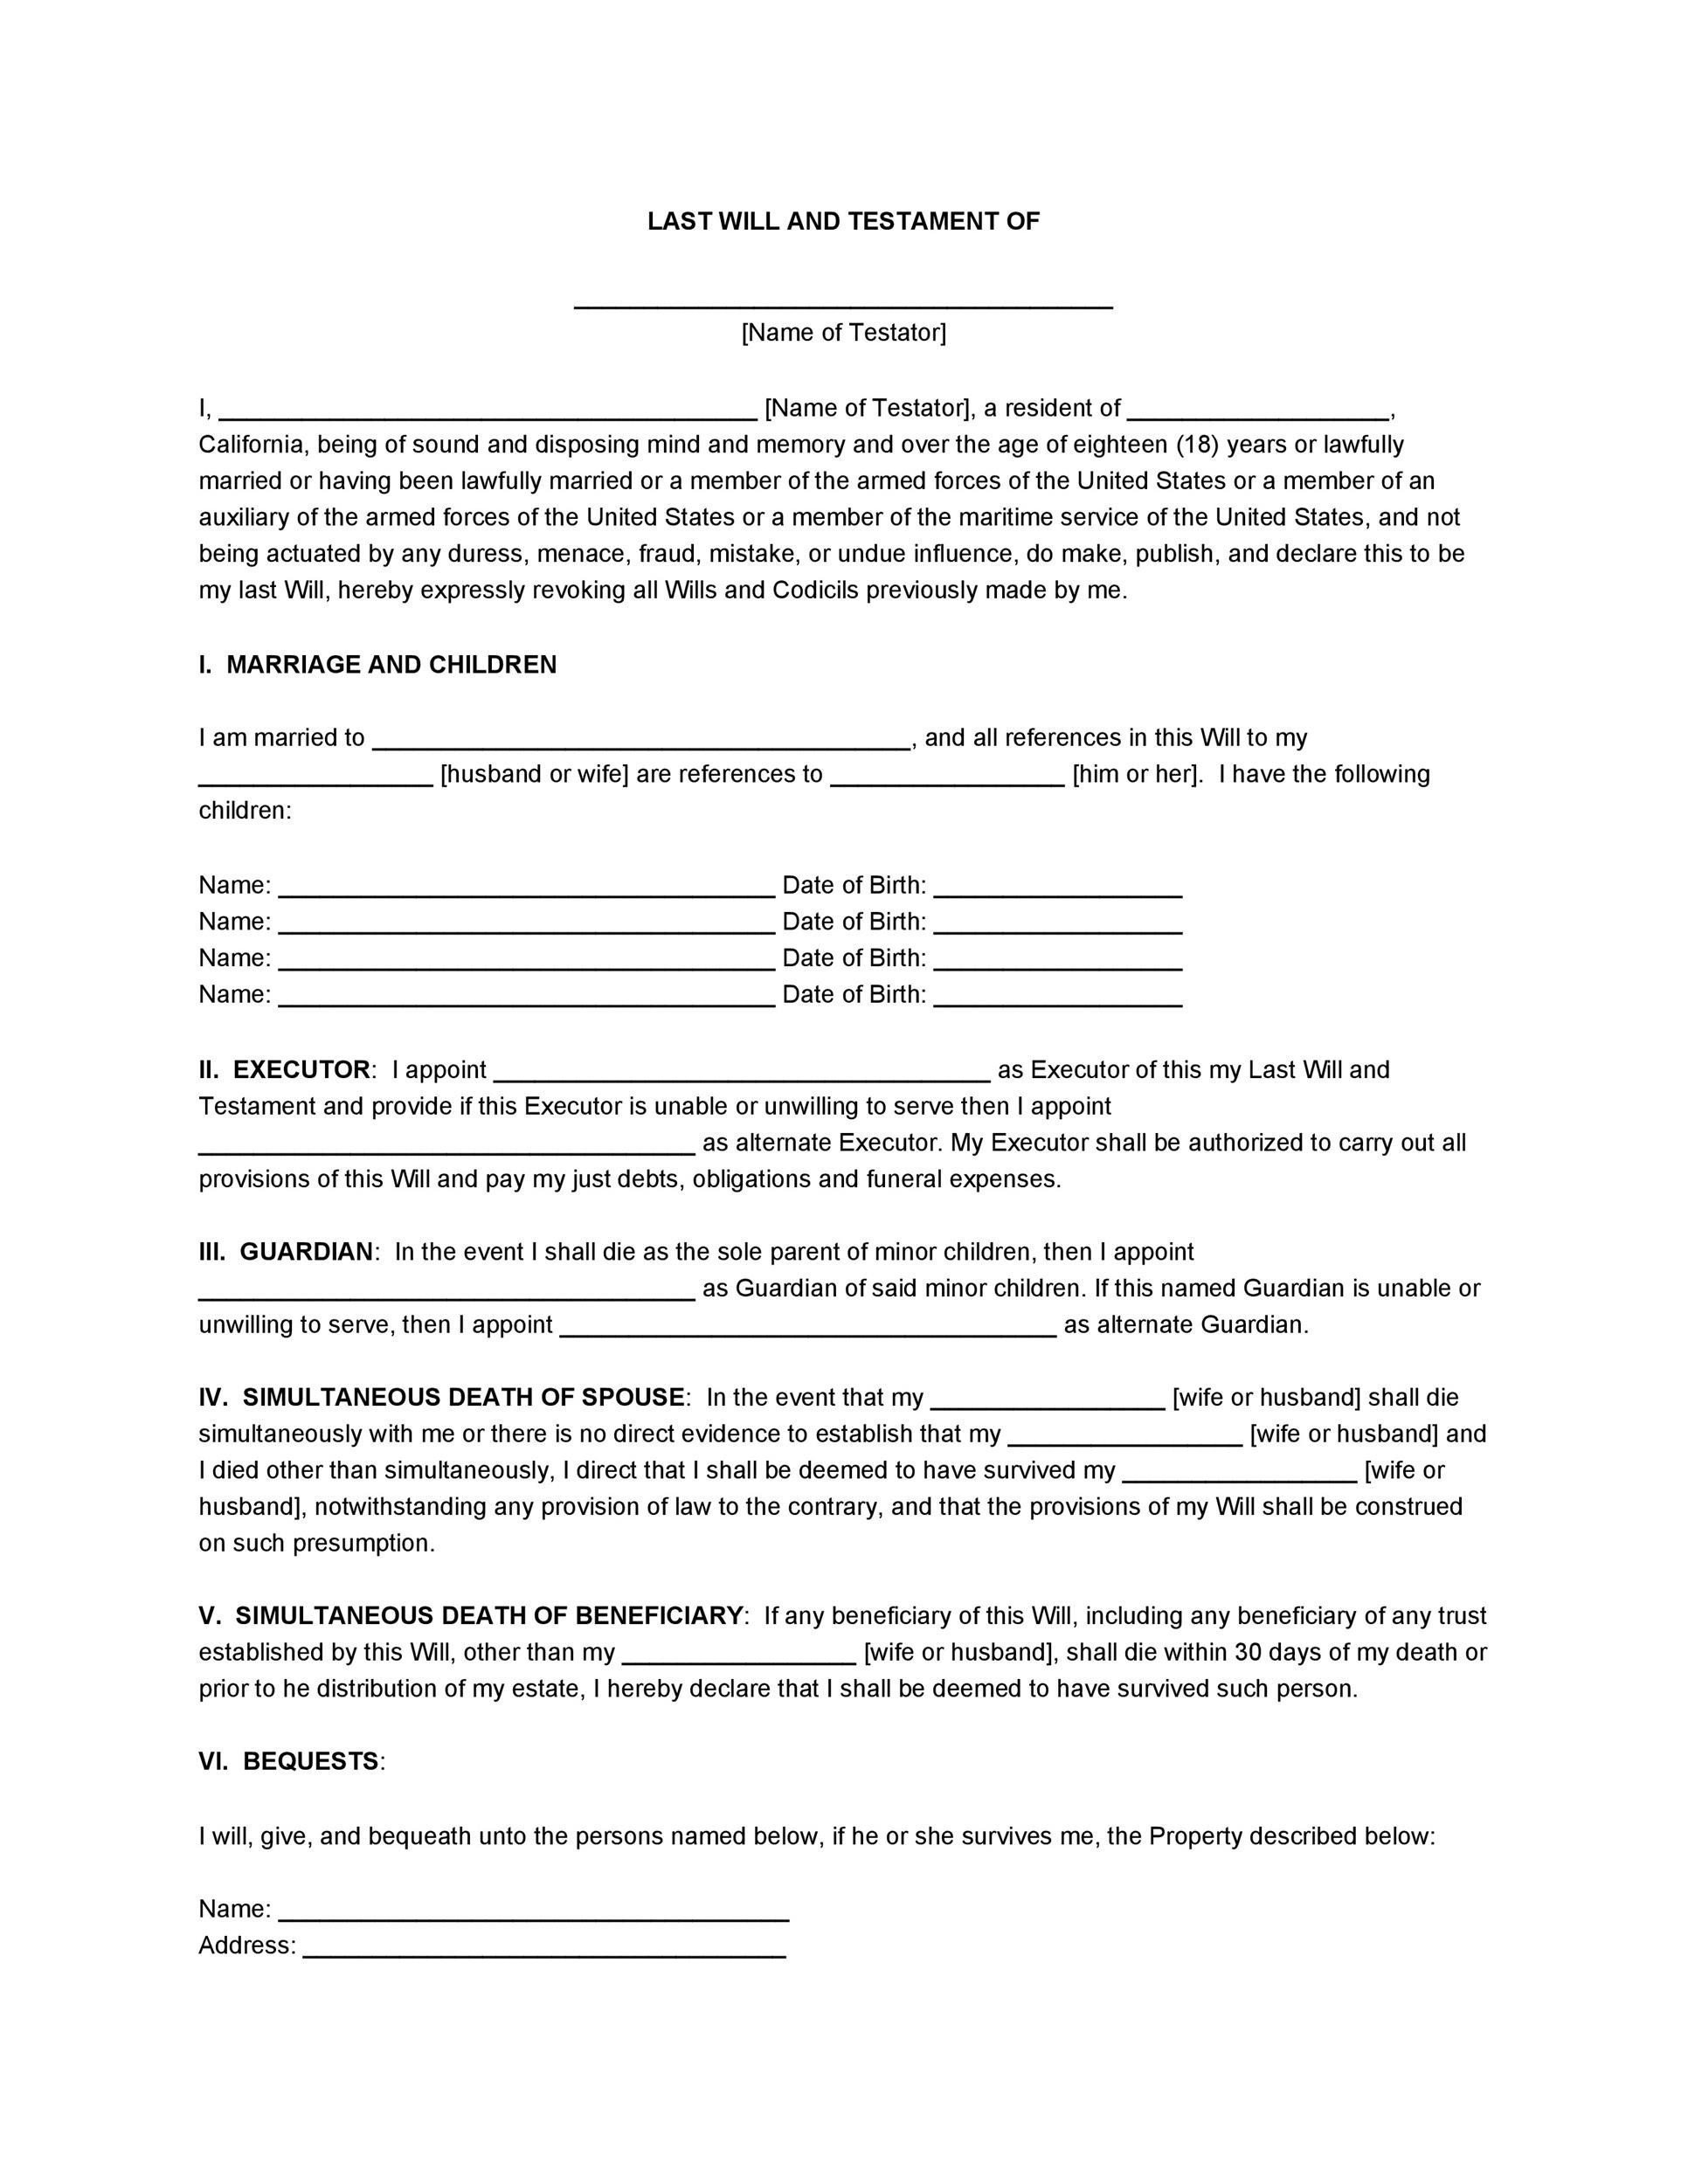 39 Last Will and Testament Forms  Templates TemplateLab